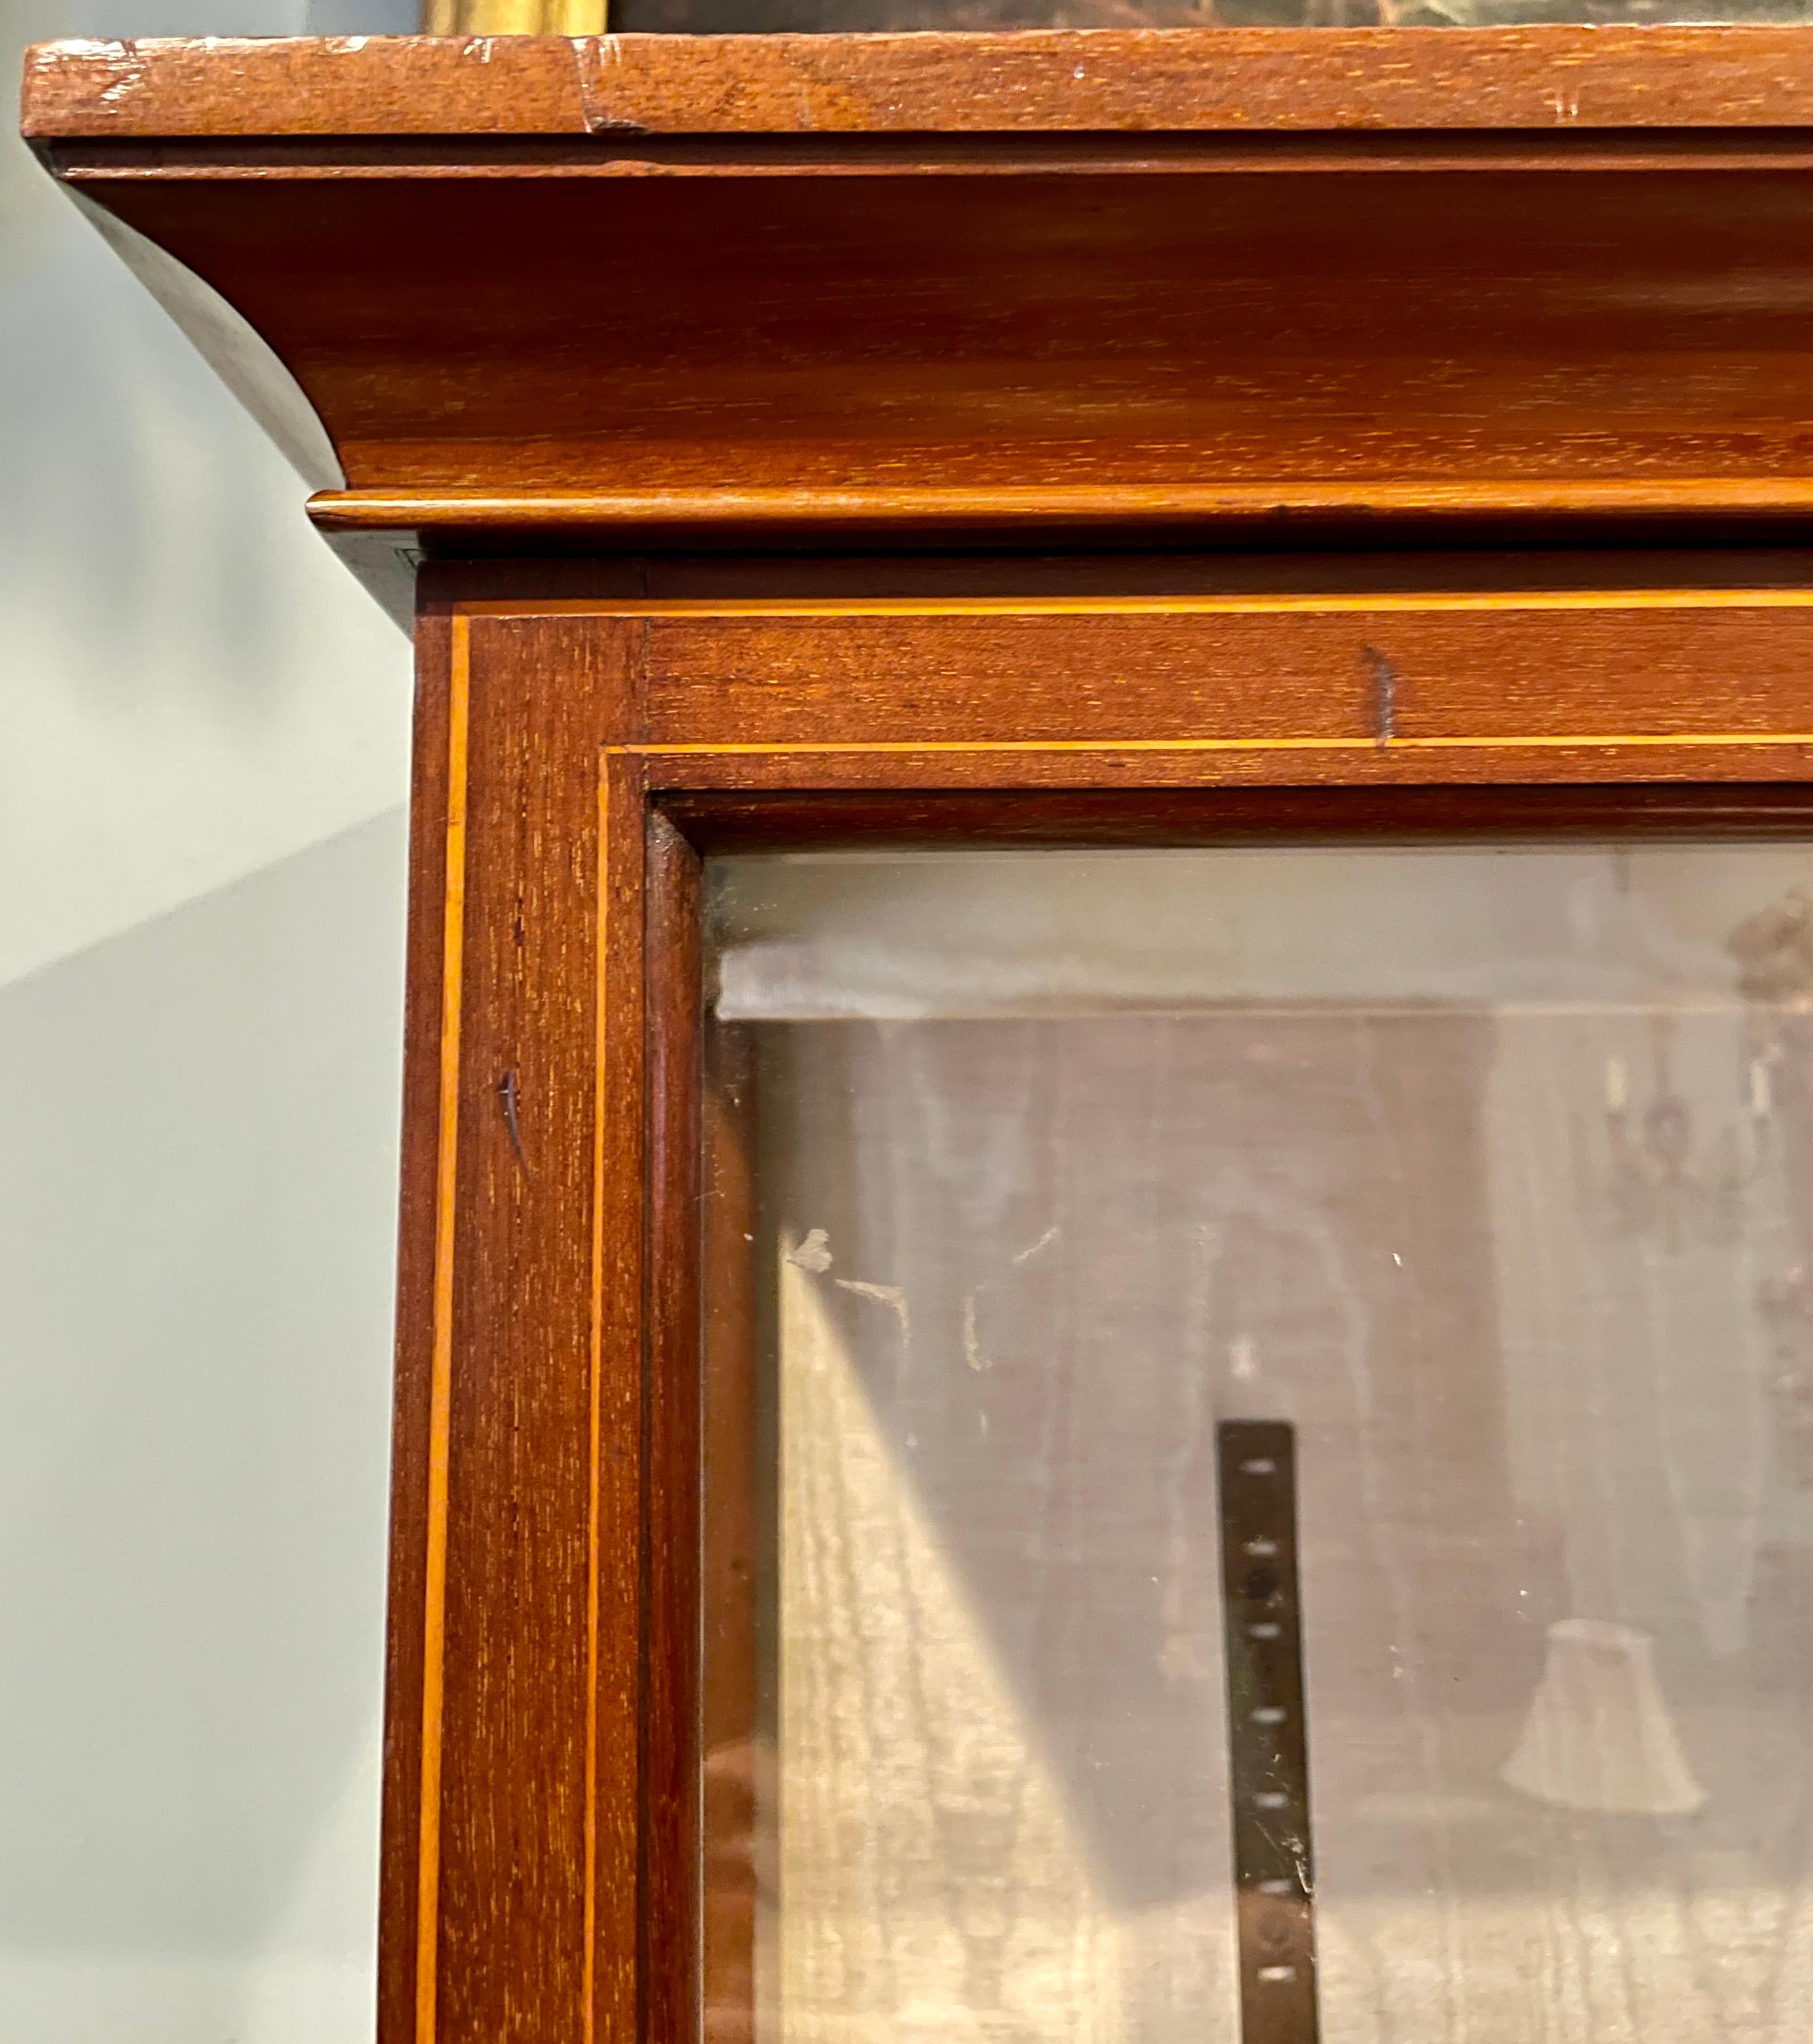 Antique English Mahogany Display Cabinet with Glass Doors and Fitted Shelves, Circa 1890.